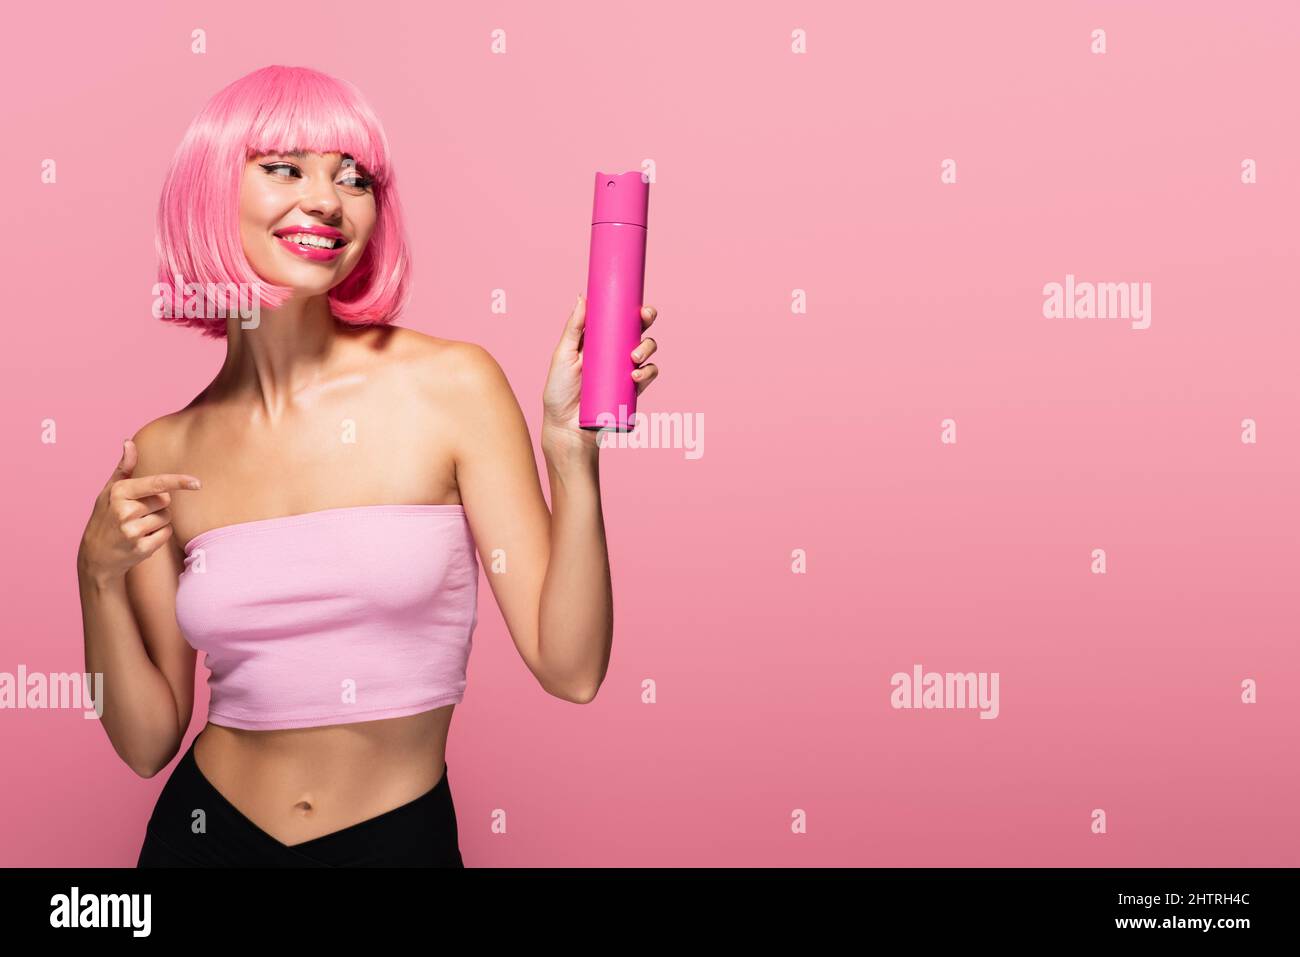 cheerful woman with colored hair pointing at bottle with spray isolated on pink,stock image Stock Photo